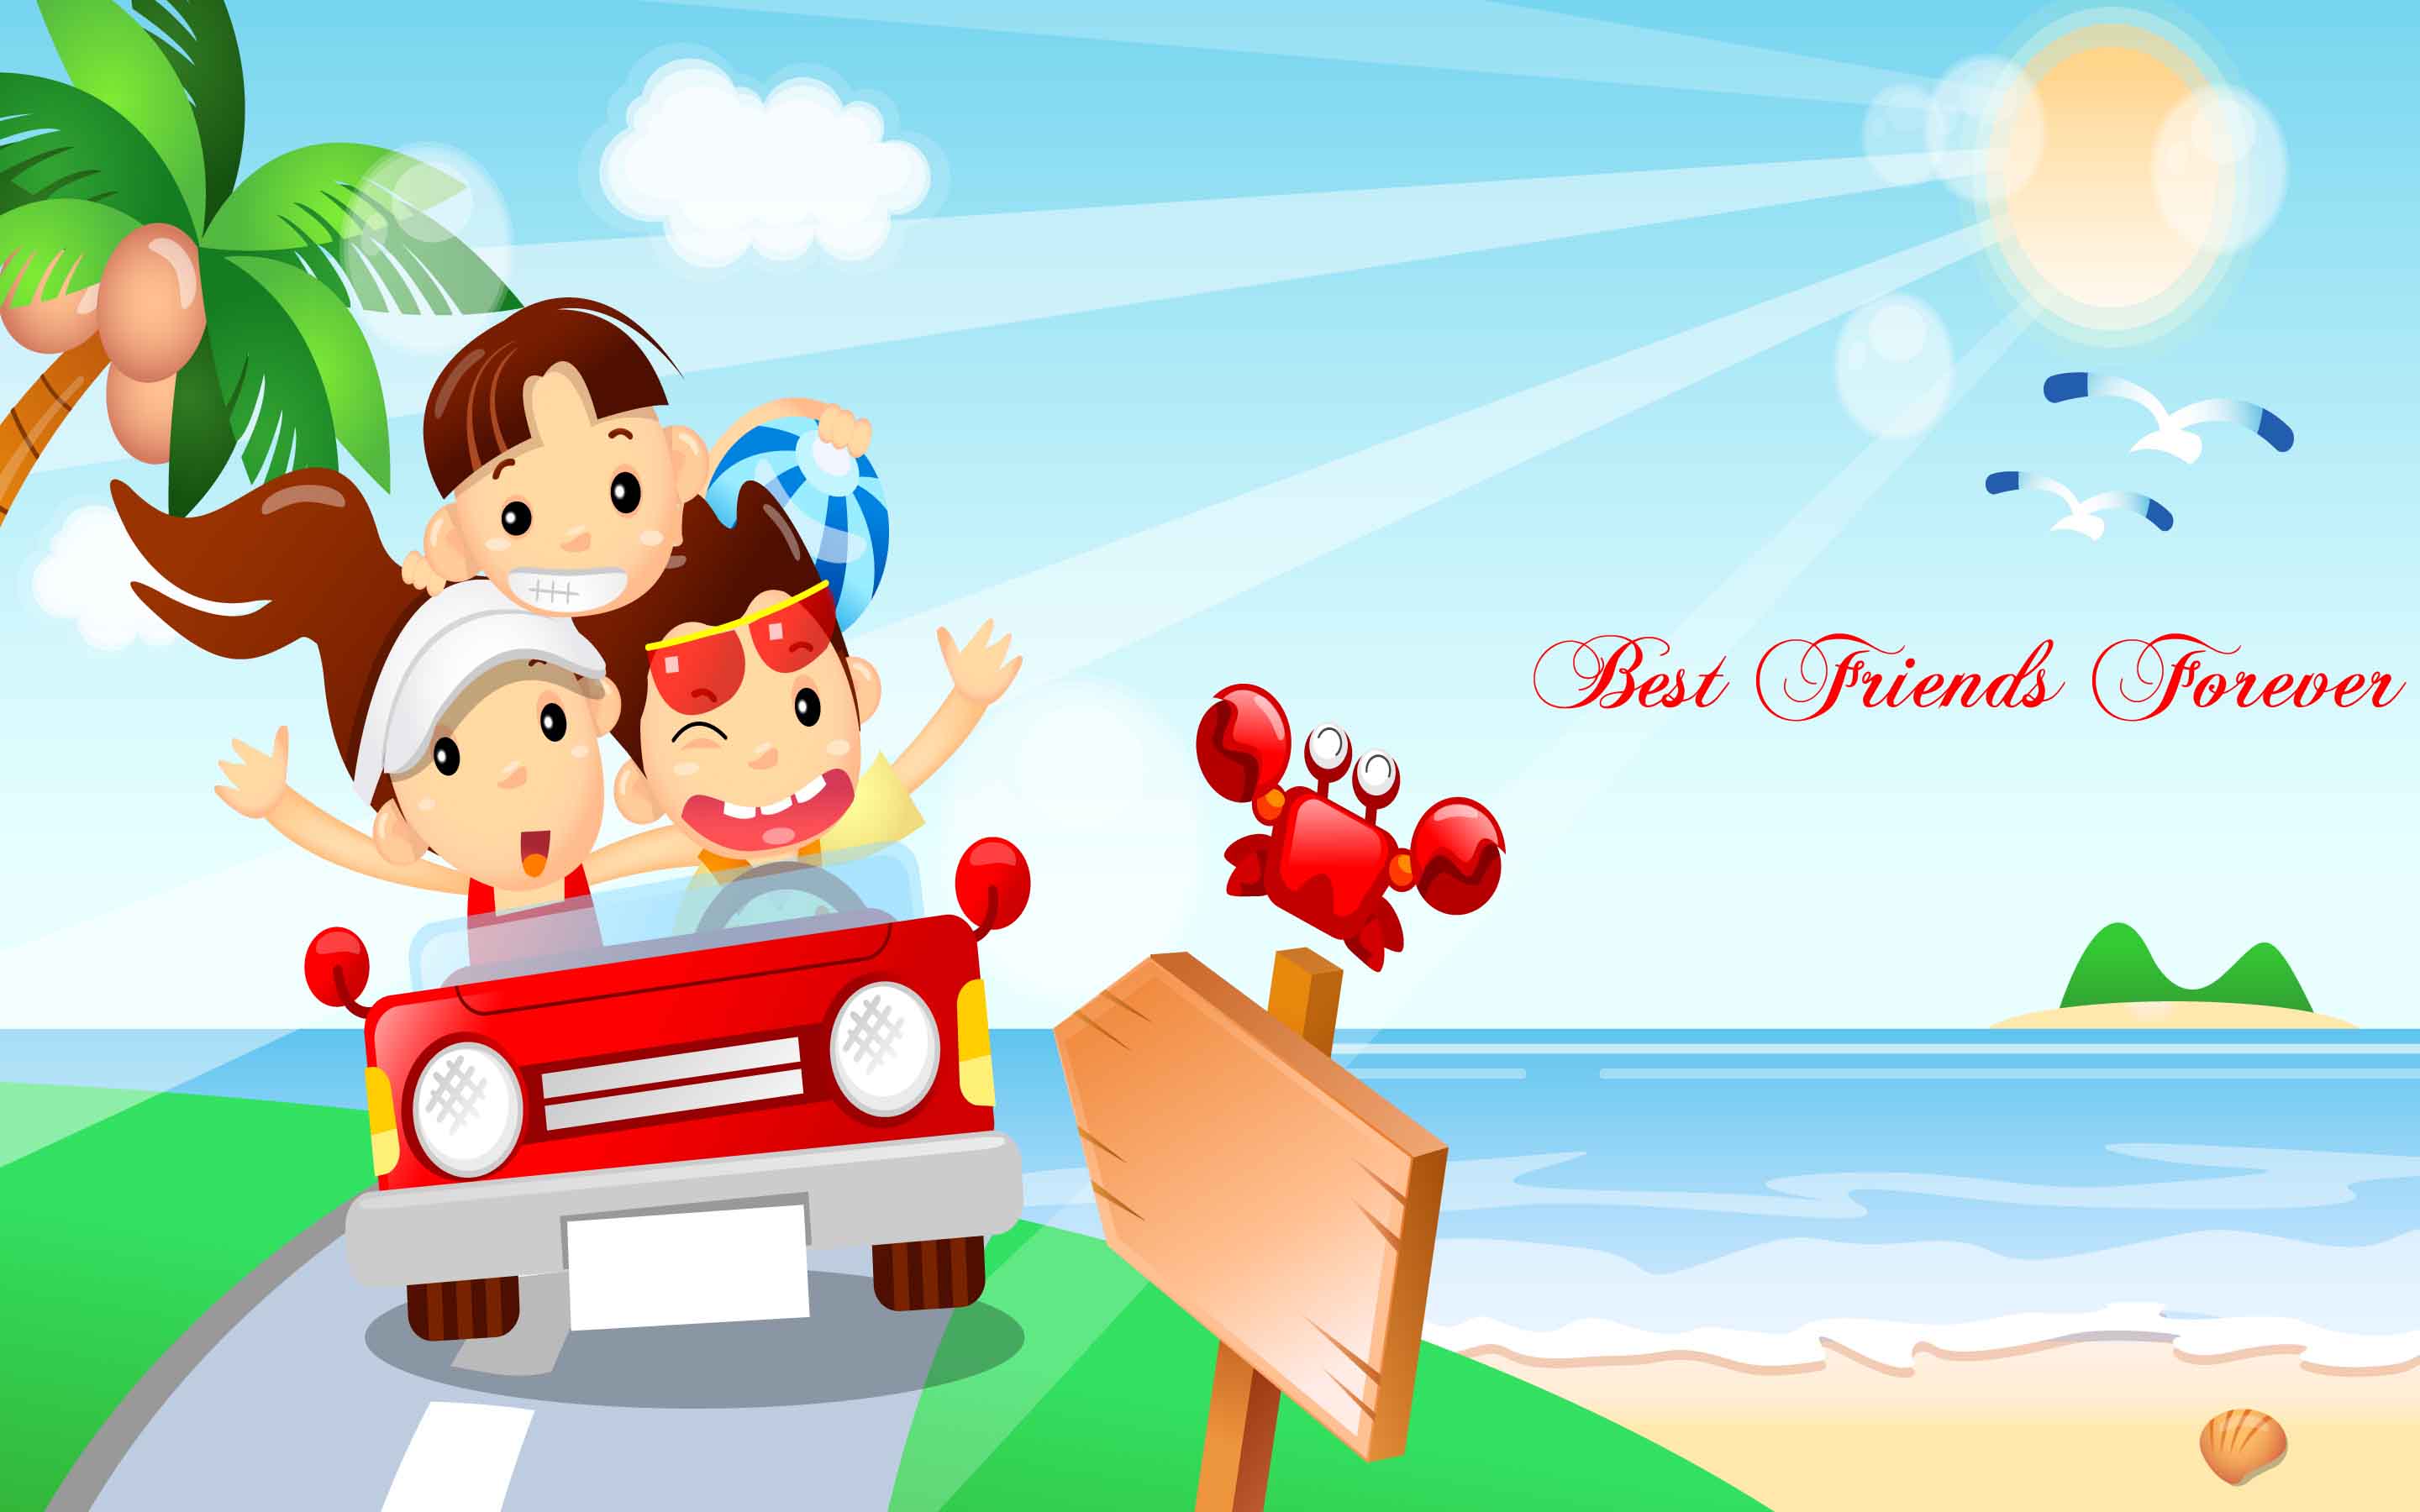 Wallpaper.wiki Best Friends Forever Wallpaper Free Download PIC